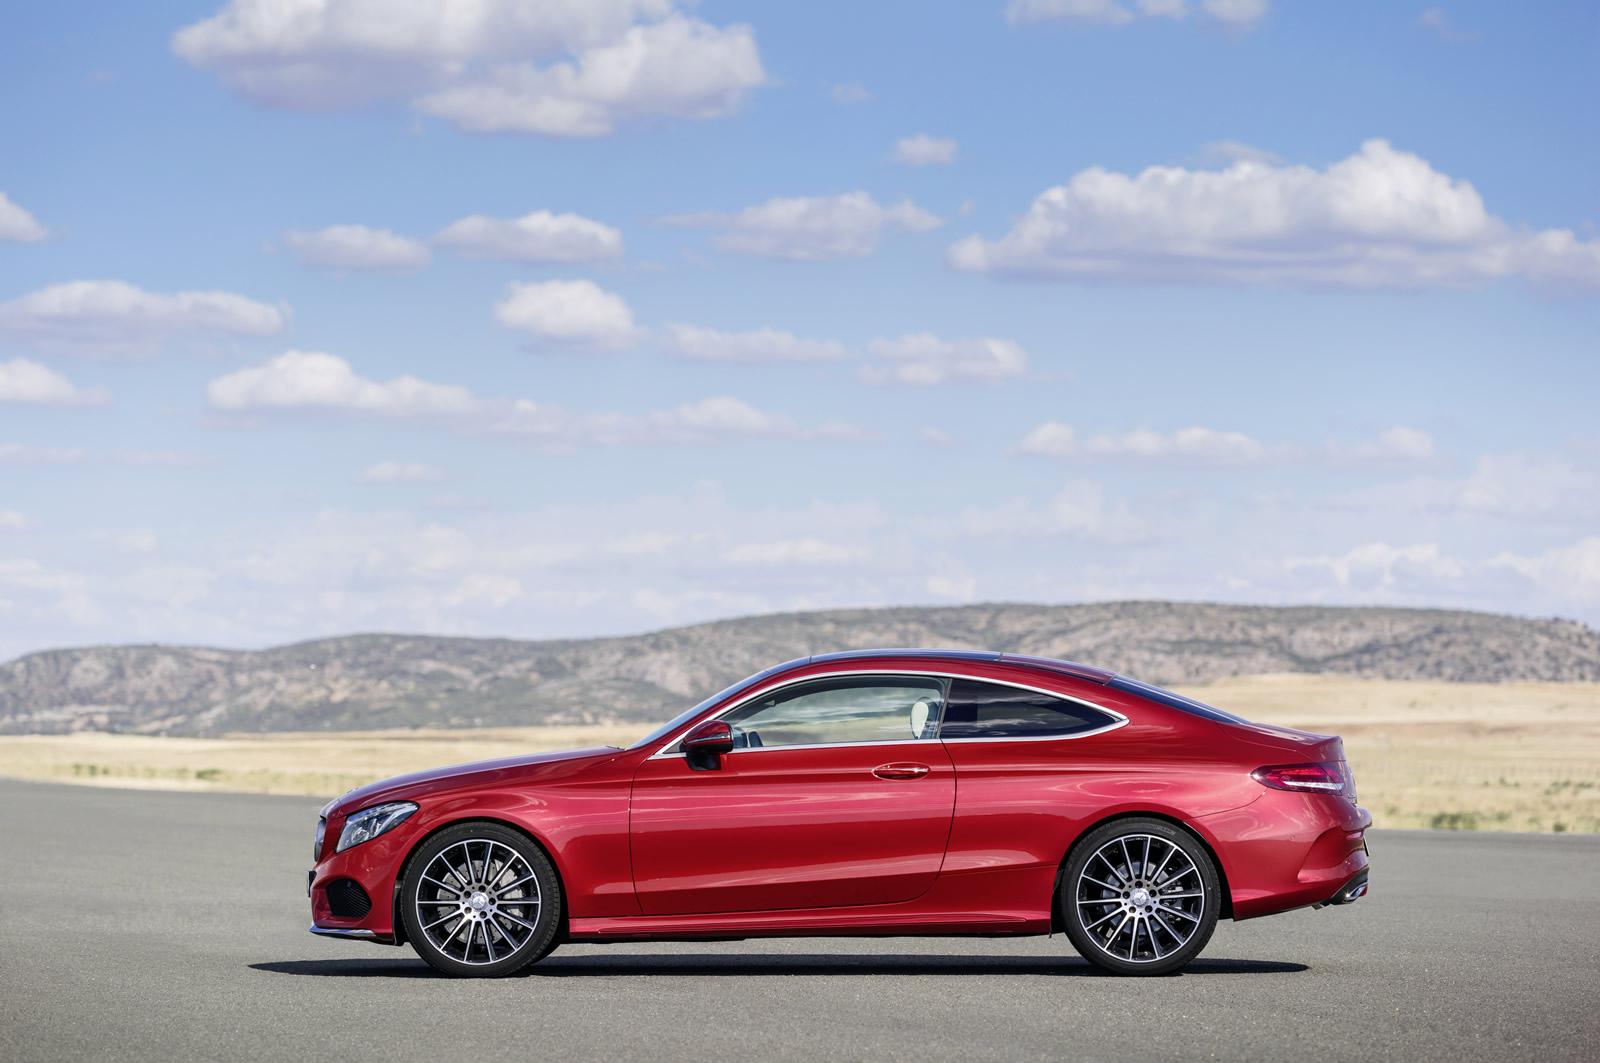 2016 MERCEDES C SERS COUPE RESM GALERS